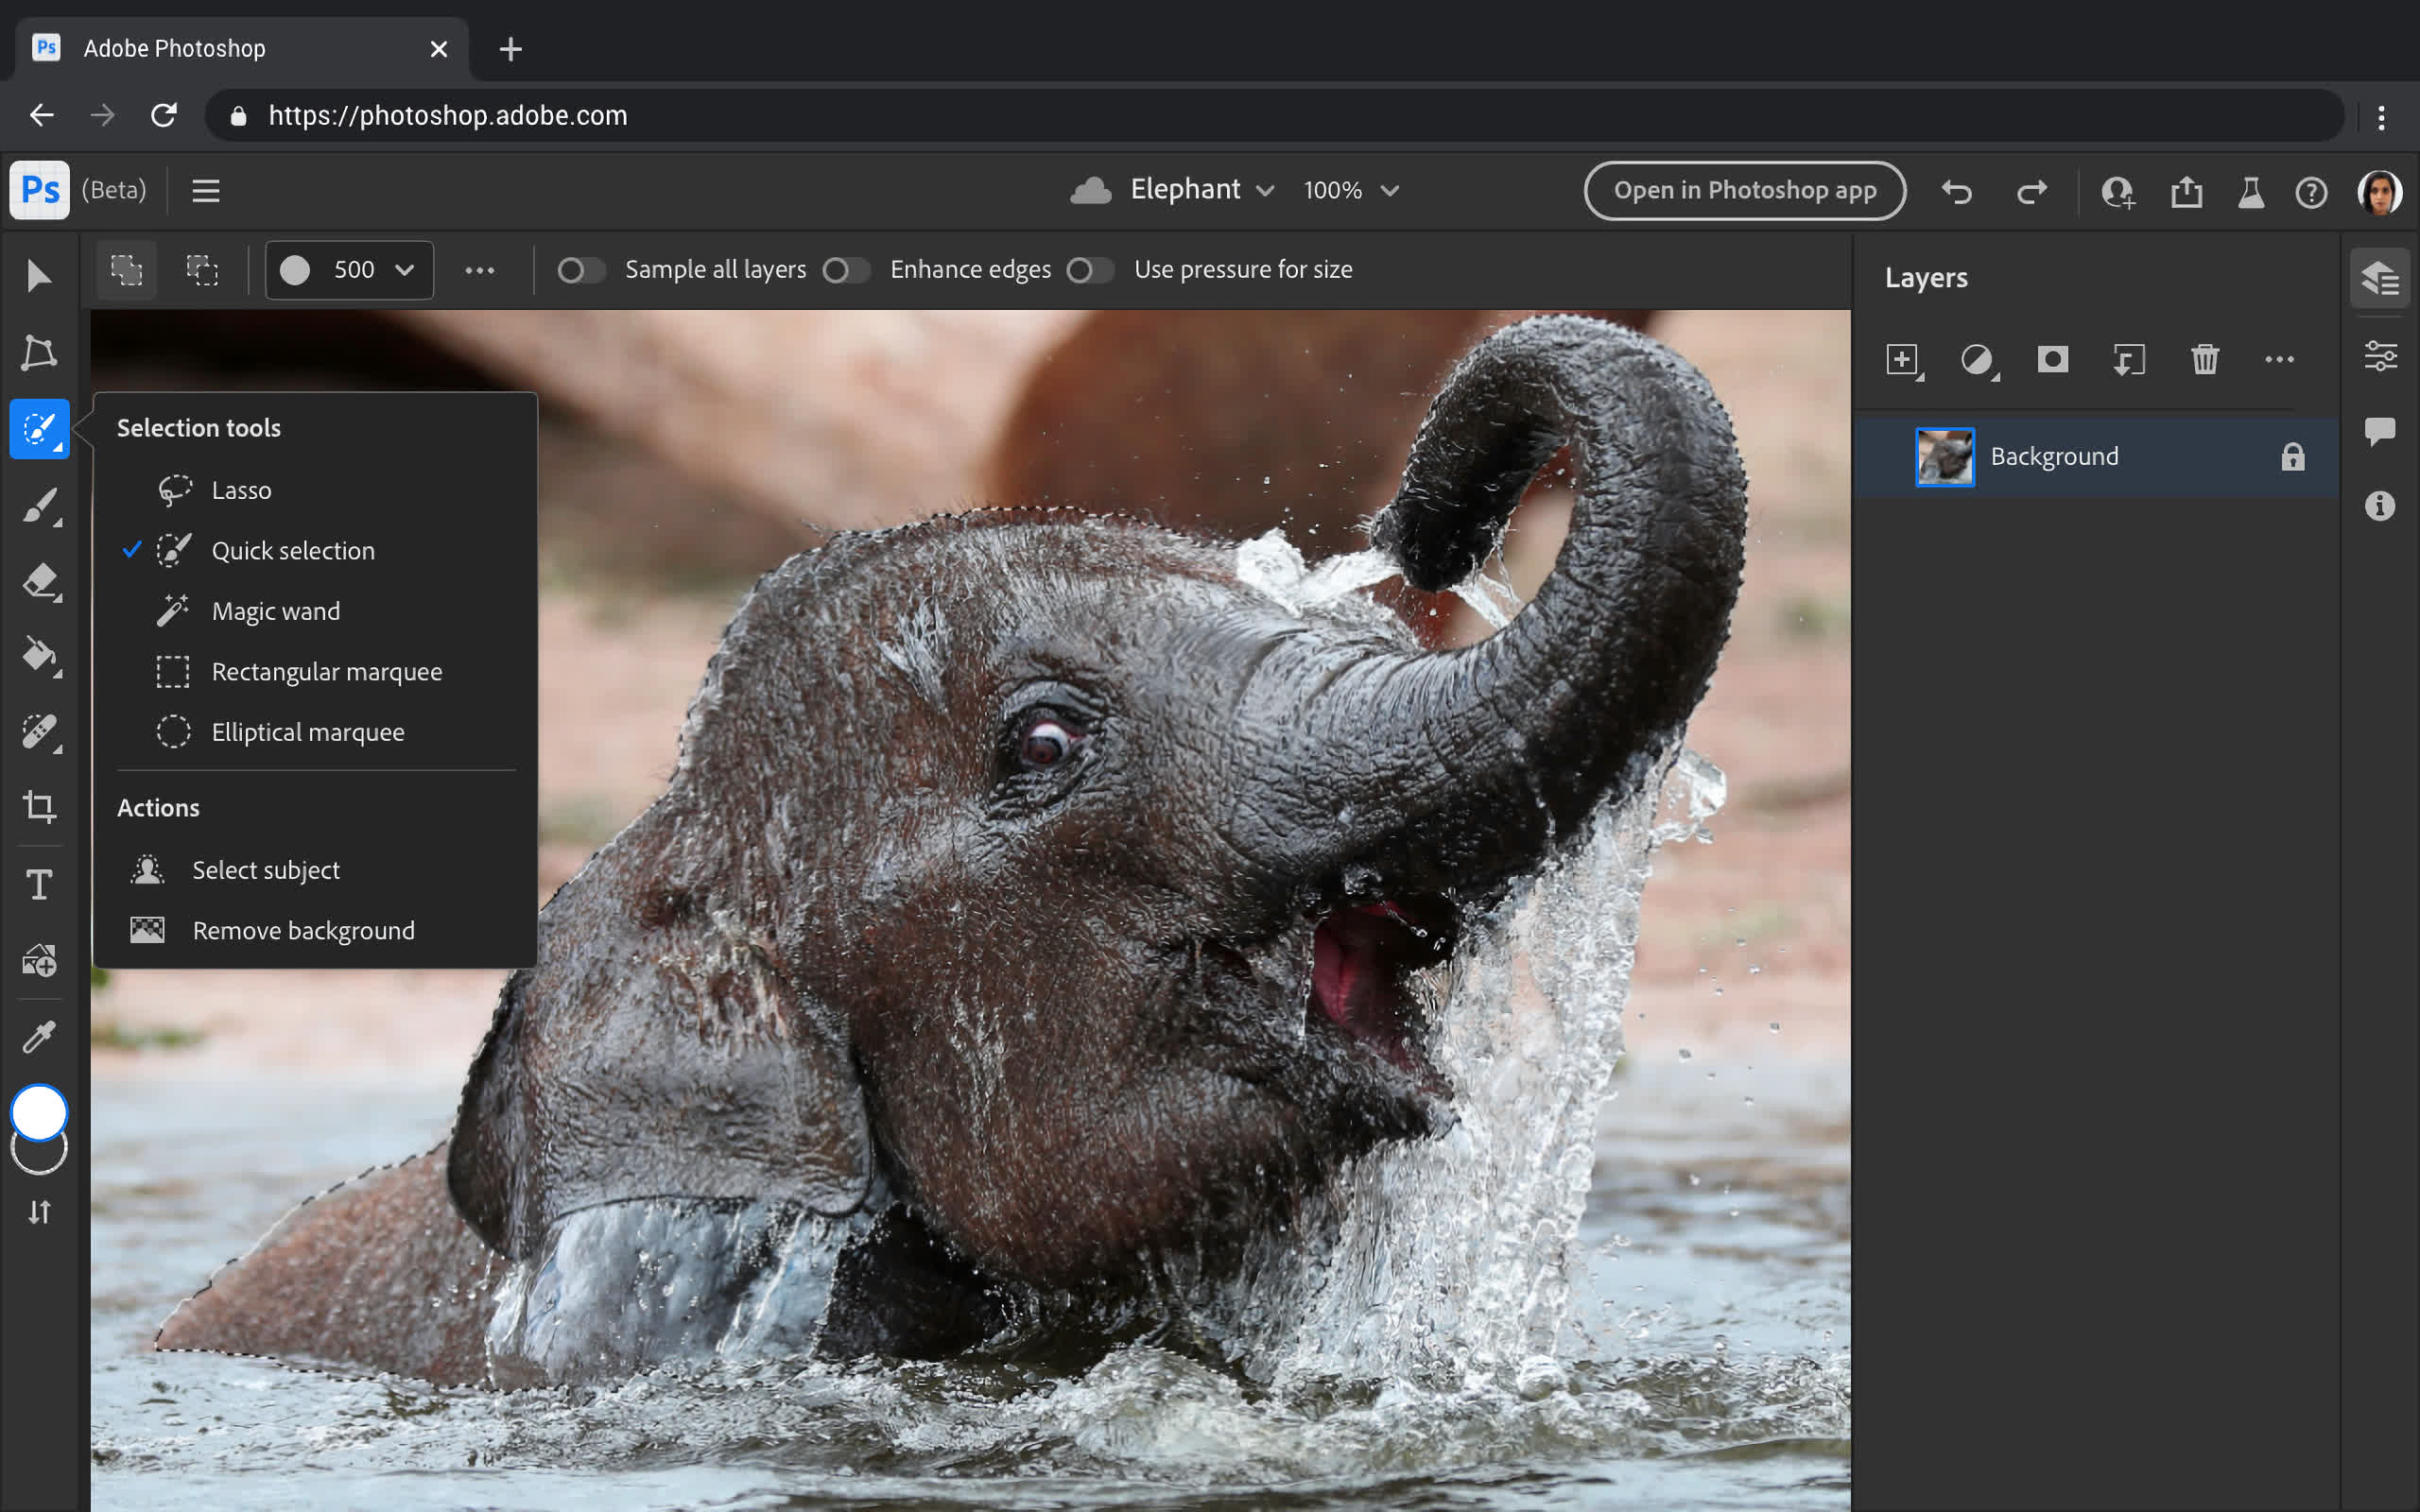 Adobe is bringing Photoshop and Illustrator apps to the web